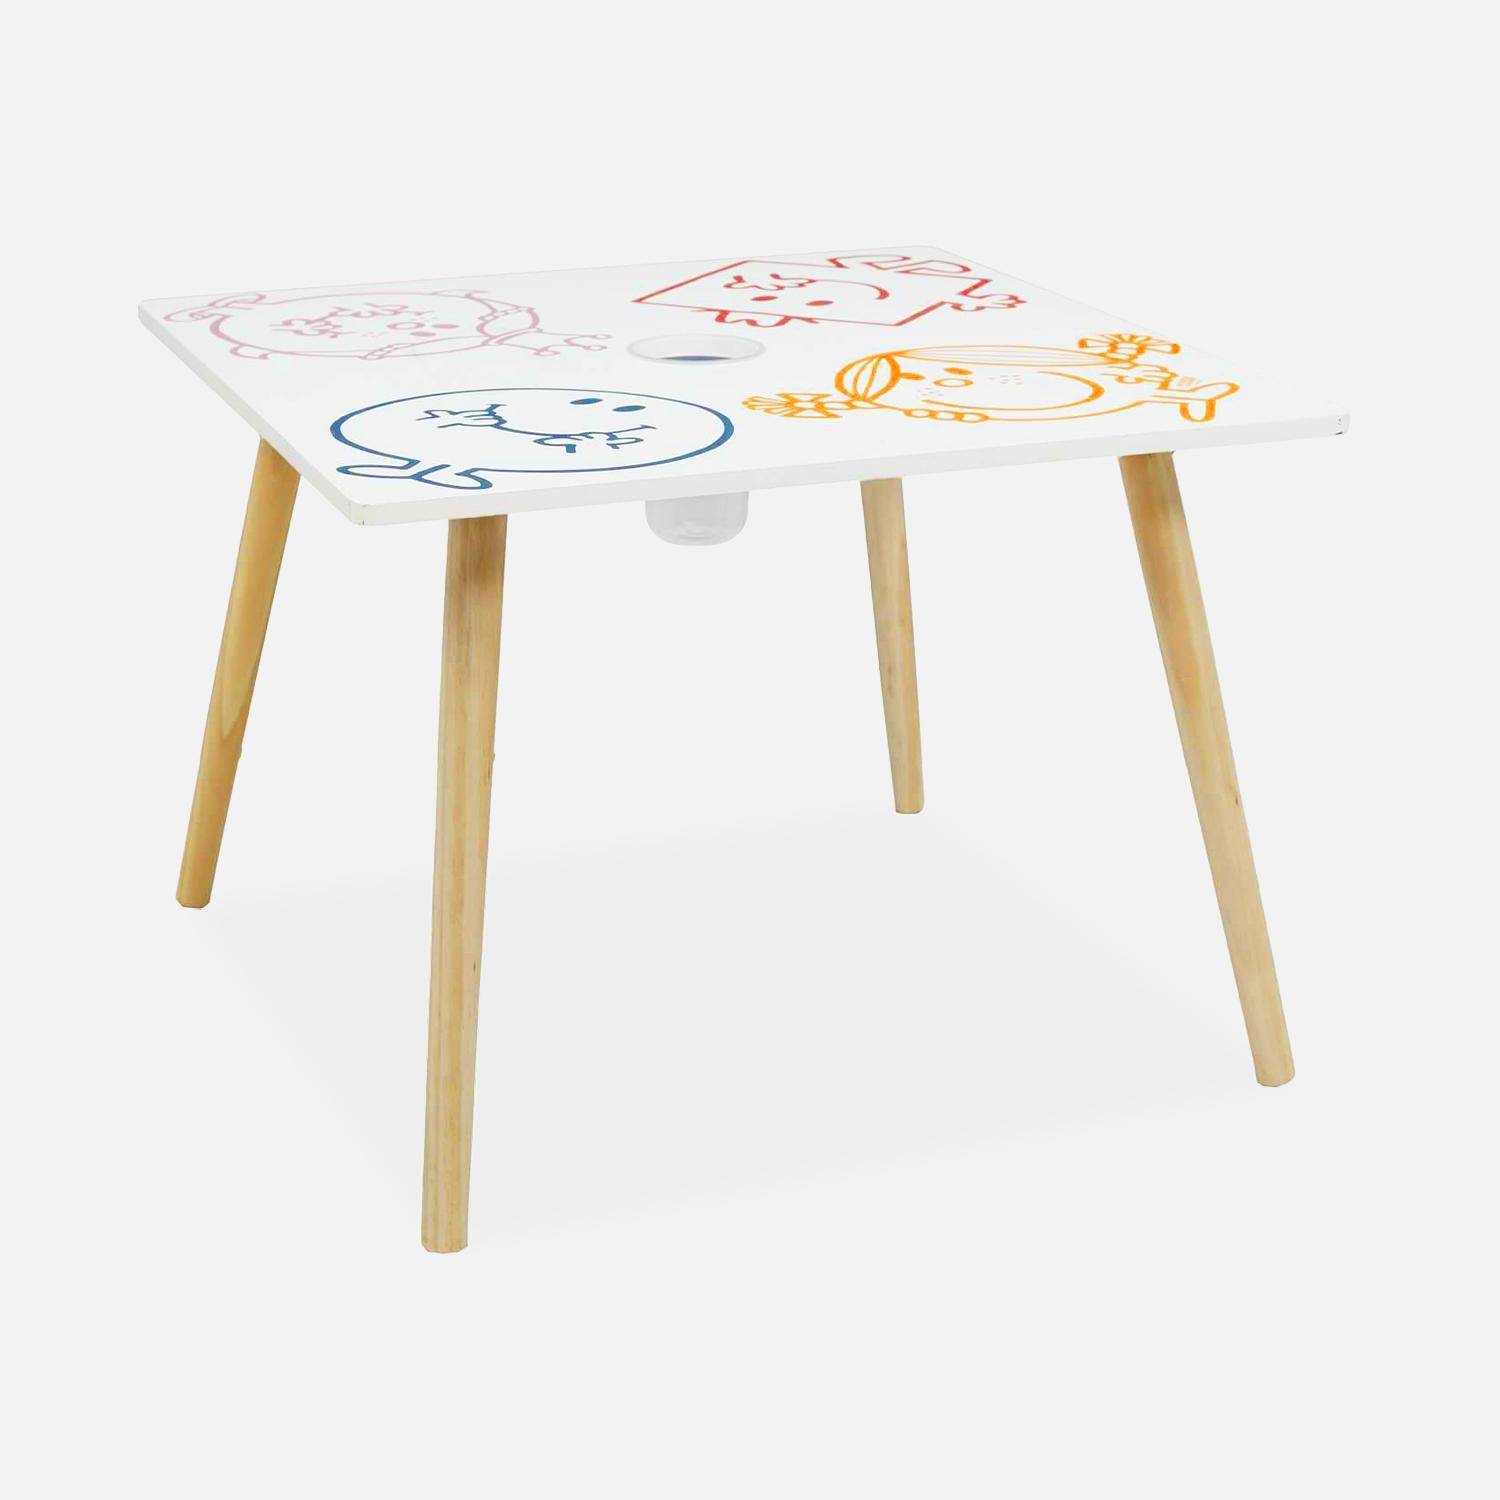 Table with pencil cup for children in the Mr. Men & Little Miss collection Photo3